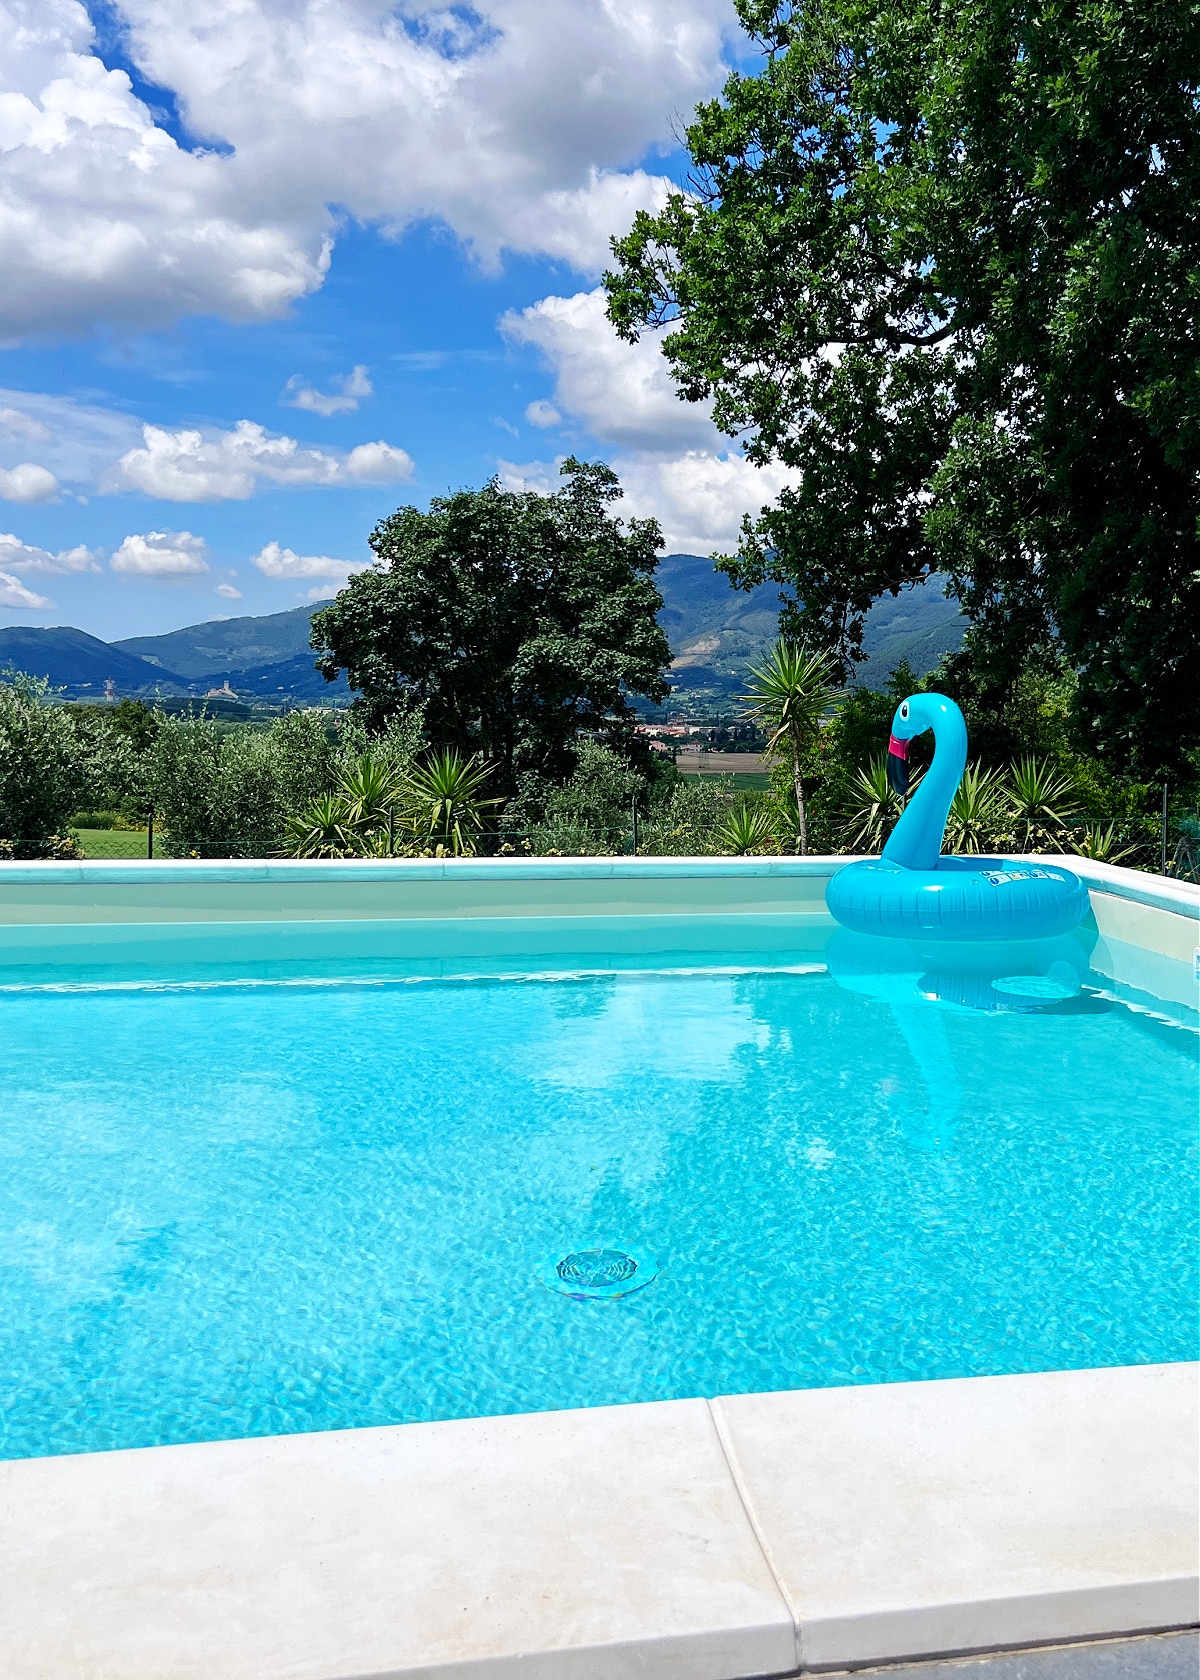 View of a pool and green countryside beyond. A large teal blue swan inflatable toy floats in the pool.